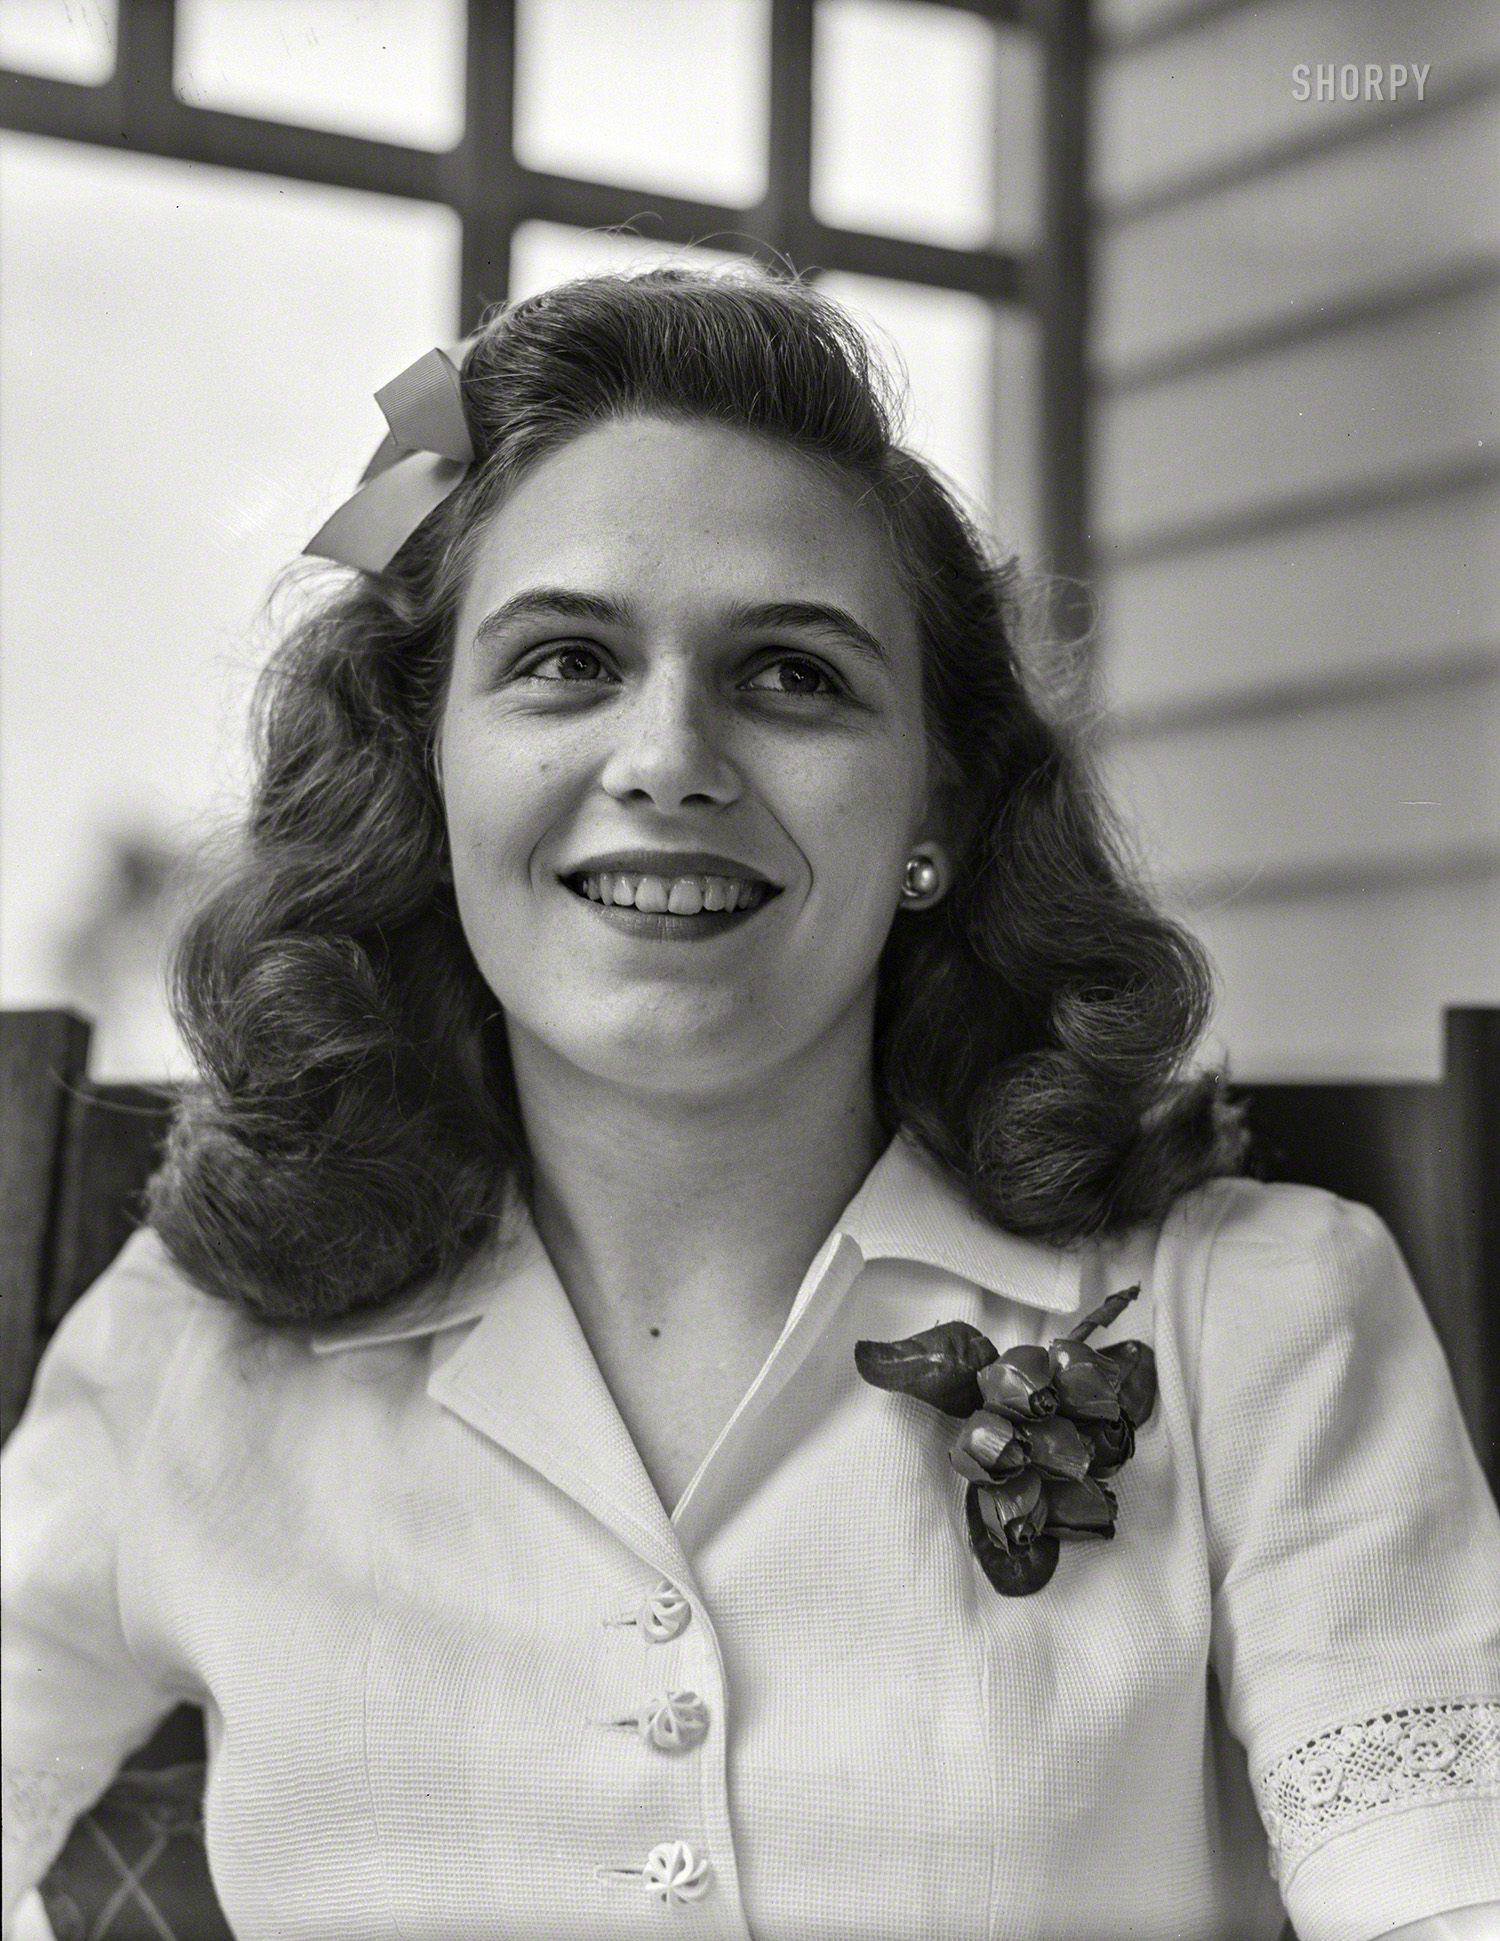 May 1942. "Southington, Connecticut. A girl." Medium format nitrate negative by Fenno Jacobs for the Office of War Information. View full size.